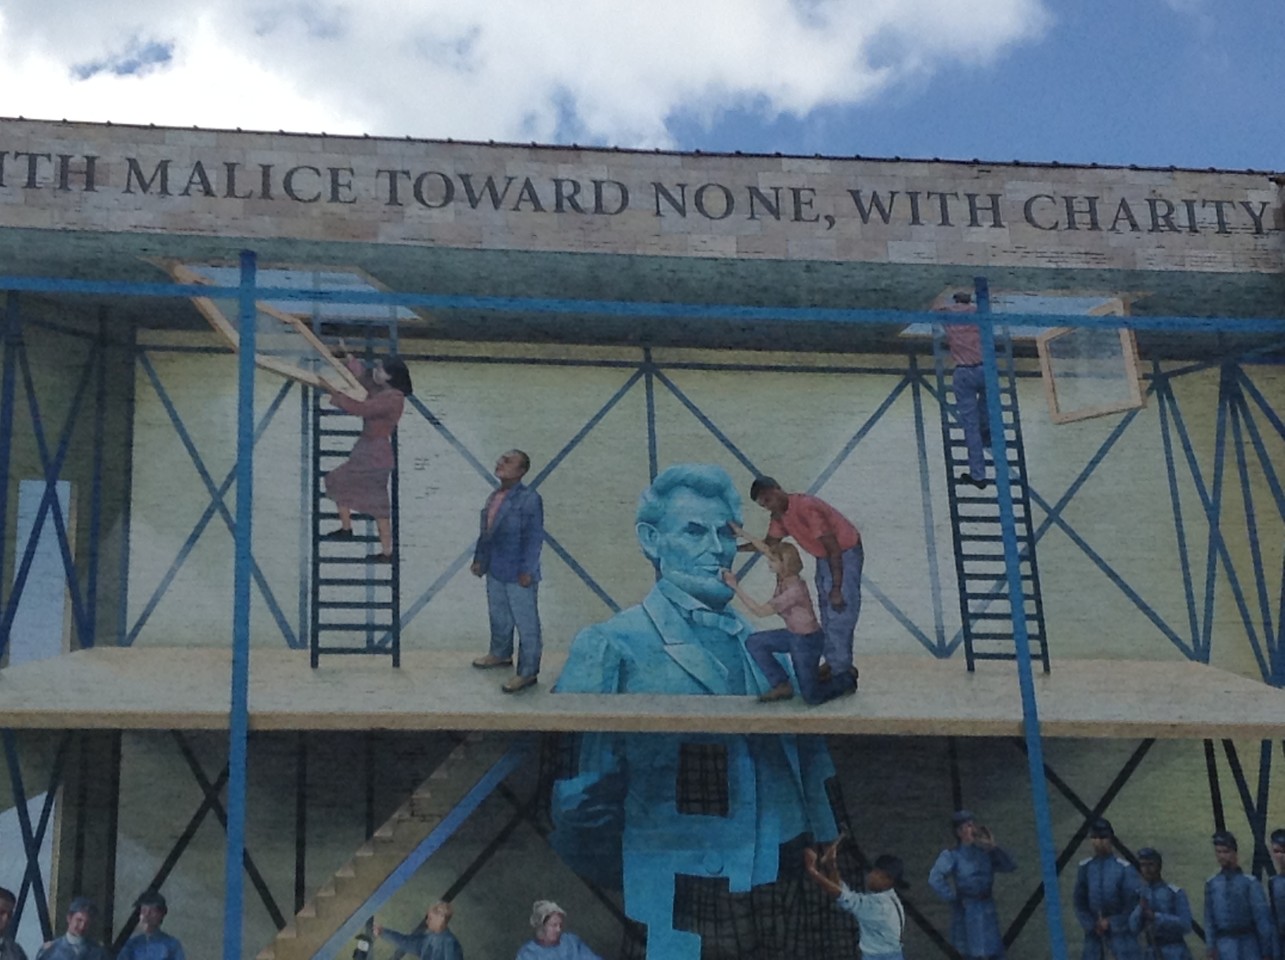 A mural in Philadelphia "with malice toward none...."